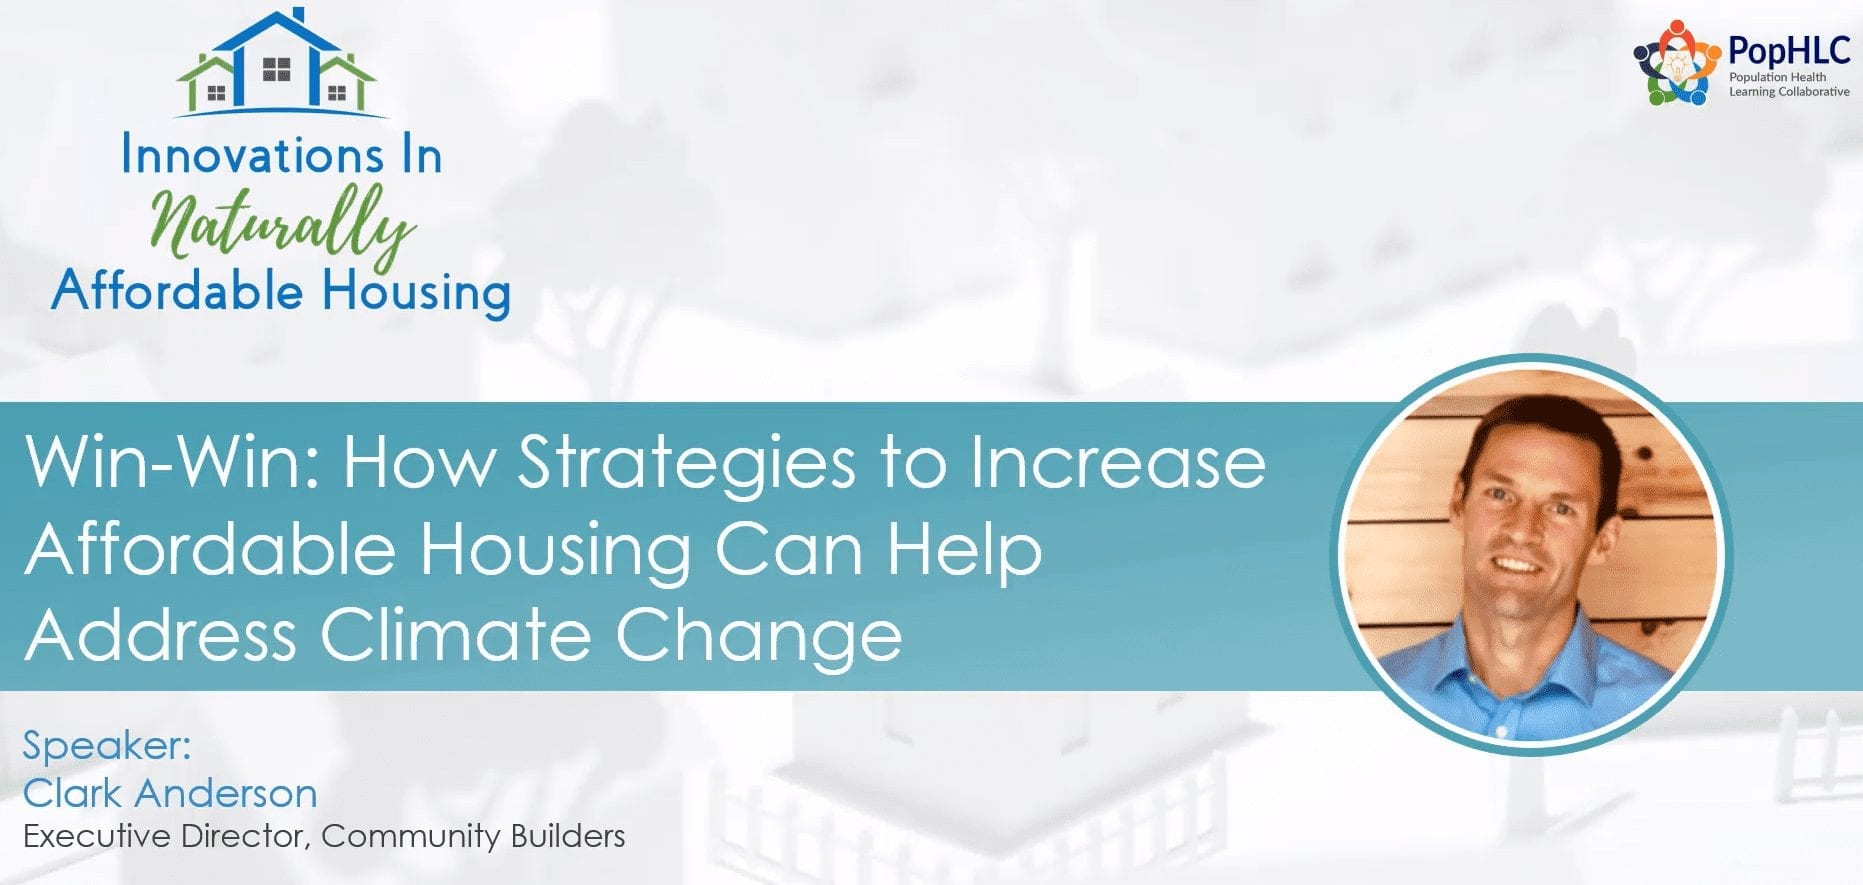 Image of a man's face next to the video title, which is "Win-Win: How Strategies to Increase Affordable Housing Can Help Address Climate Change". Speaker is Clark Anderson, Executive Director of Community Builders